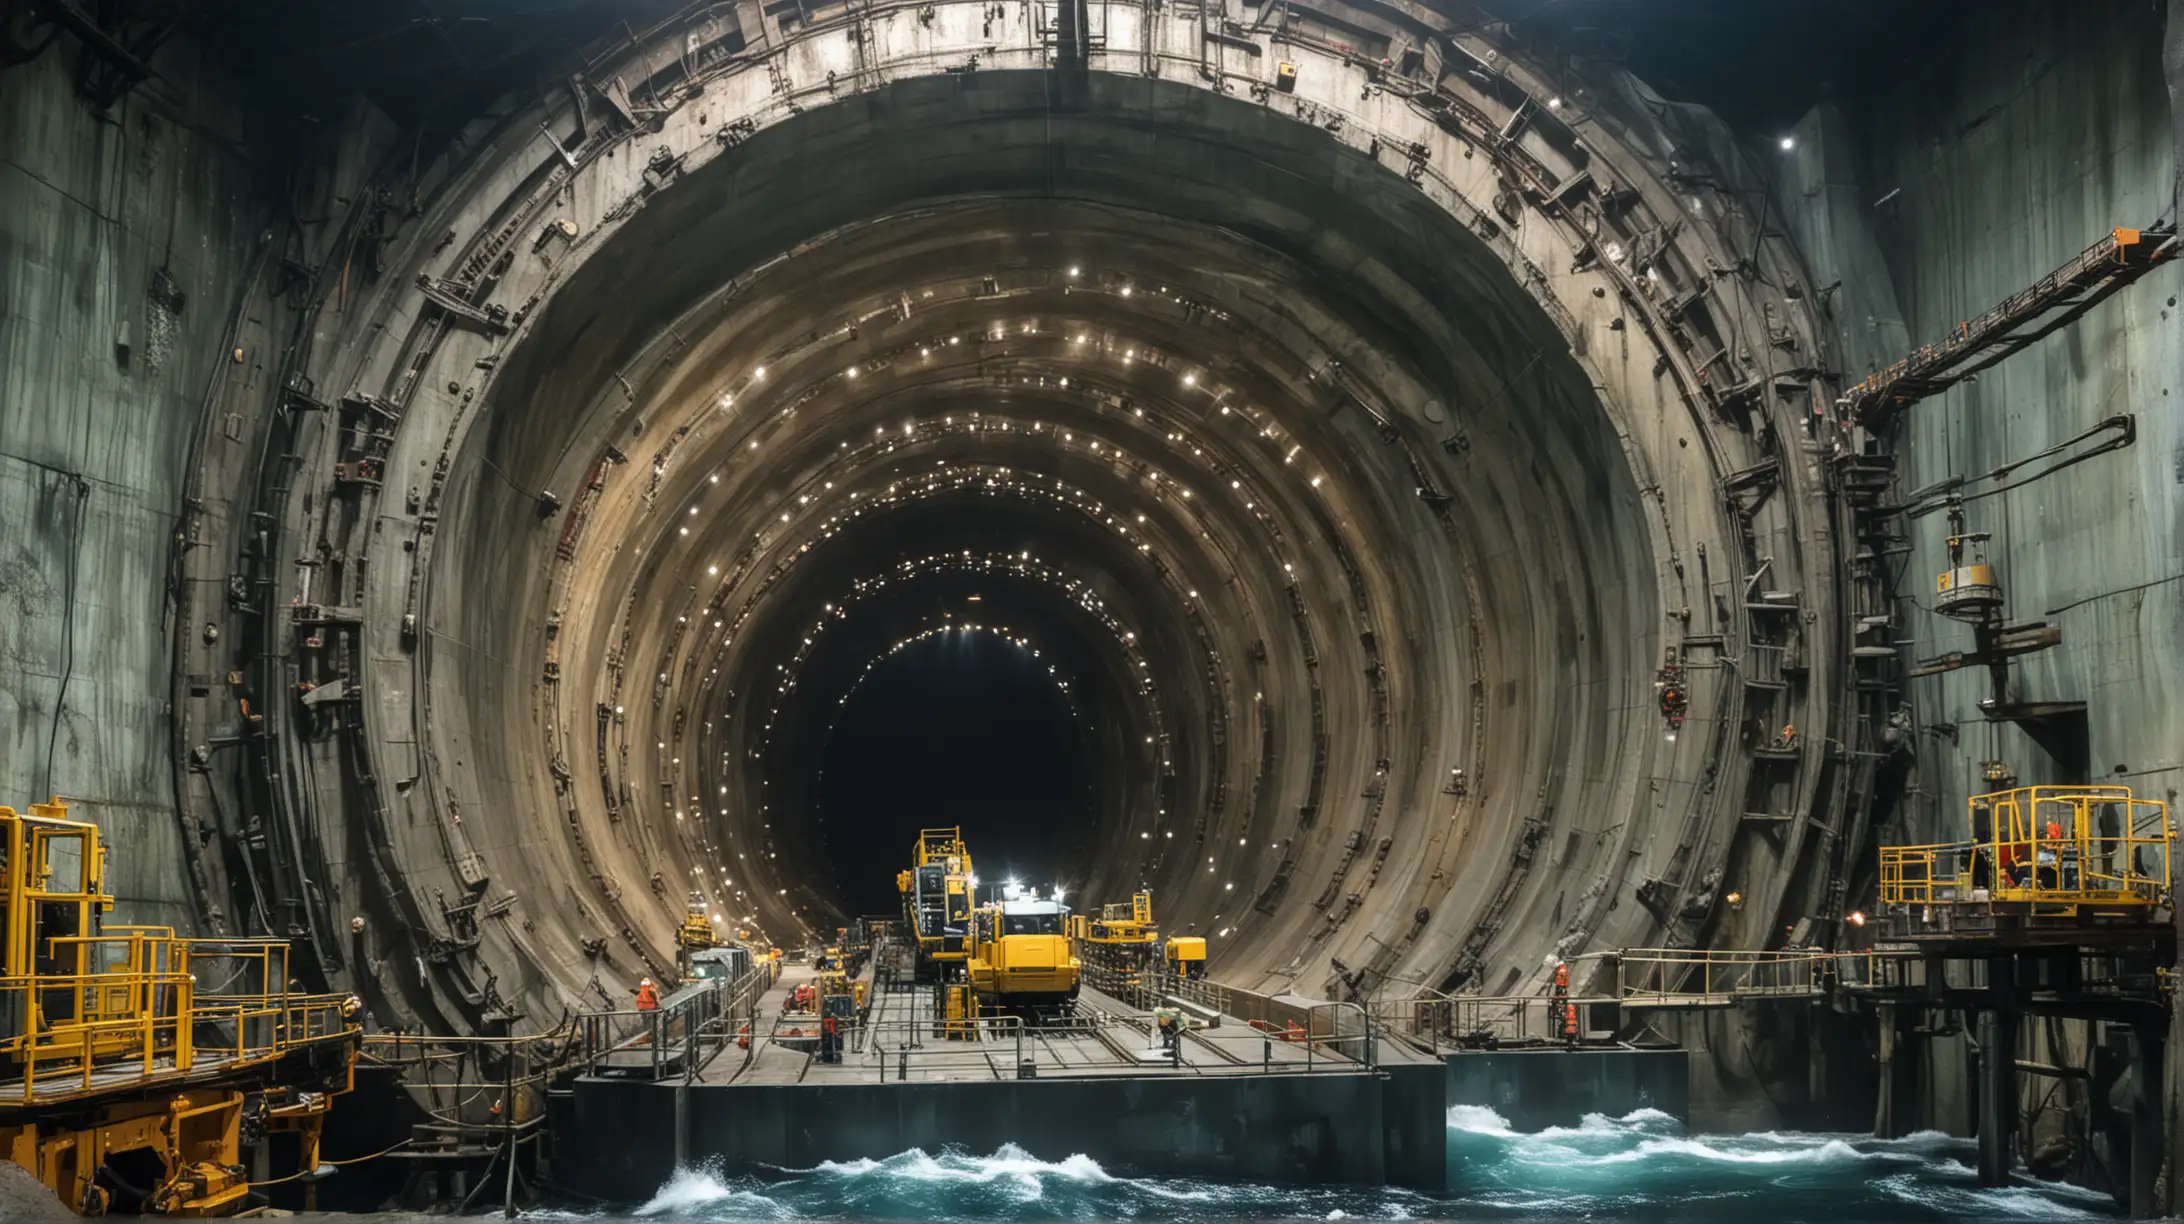 a MODERN massive long undersea tunnel drilling machine, viewed from outside constructing a very huge undersea tunnel, world's largest, projecting in the ocean that is almost complete and very beautiful and huge, modern technology